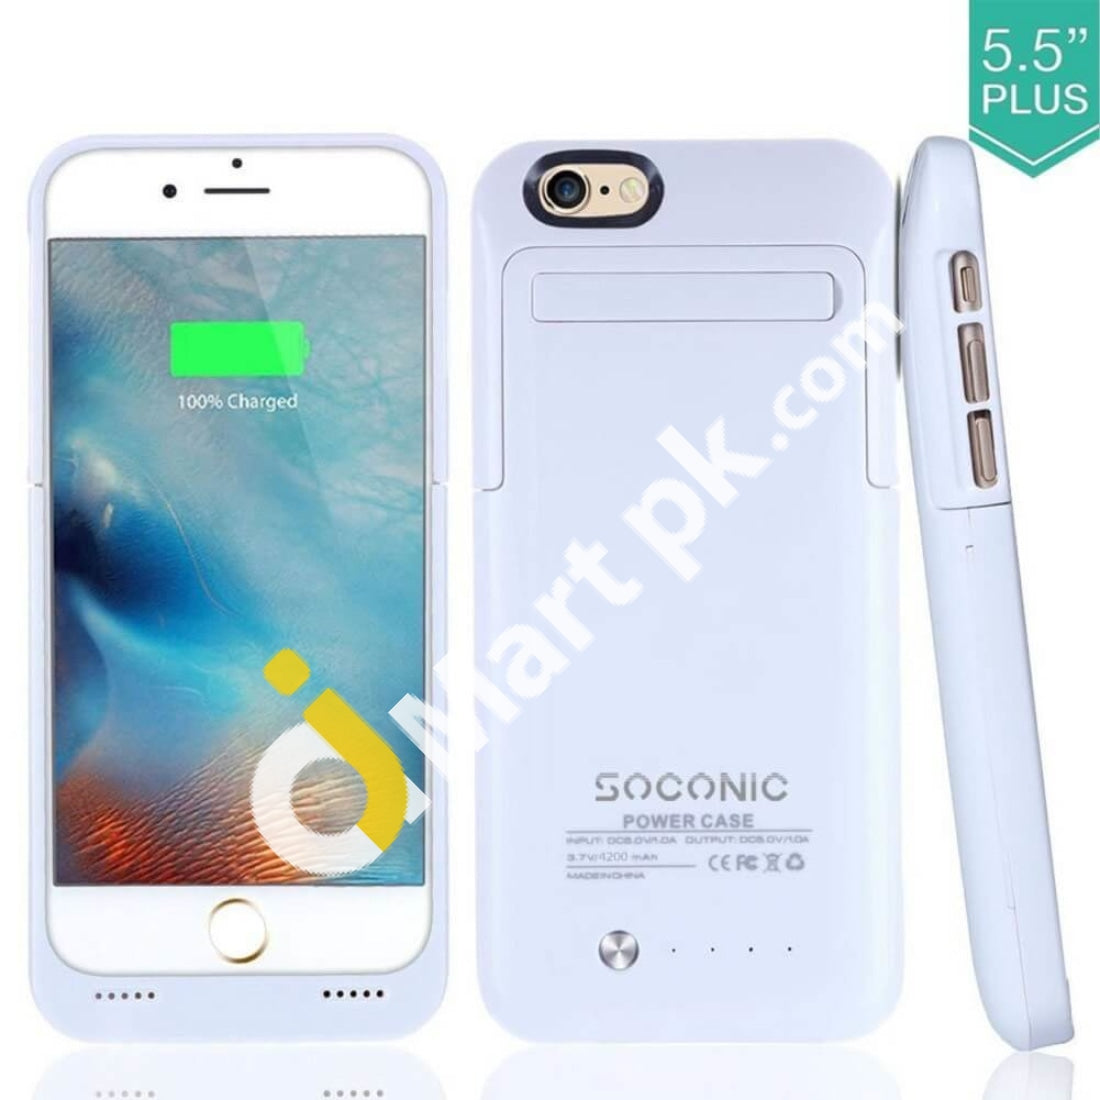 Soconic 4200Mah Rechargeable Extended Battery Charging Case For Iphone 6 / 6S Imported From Uk